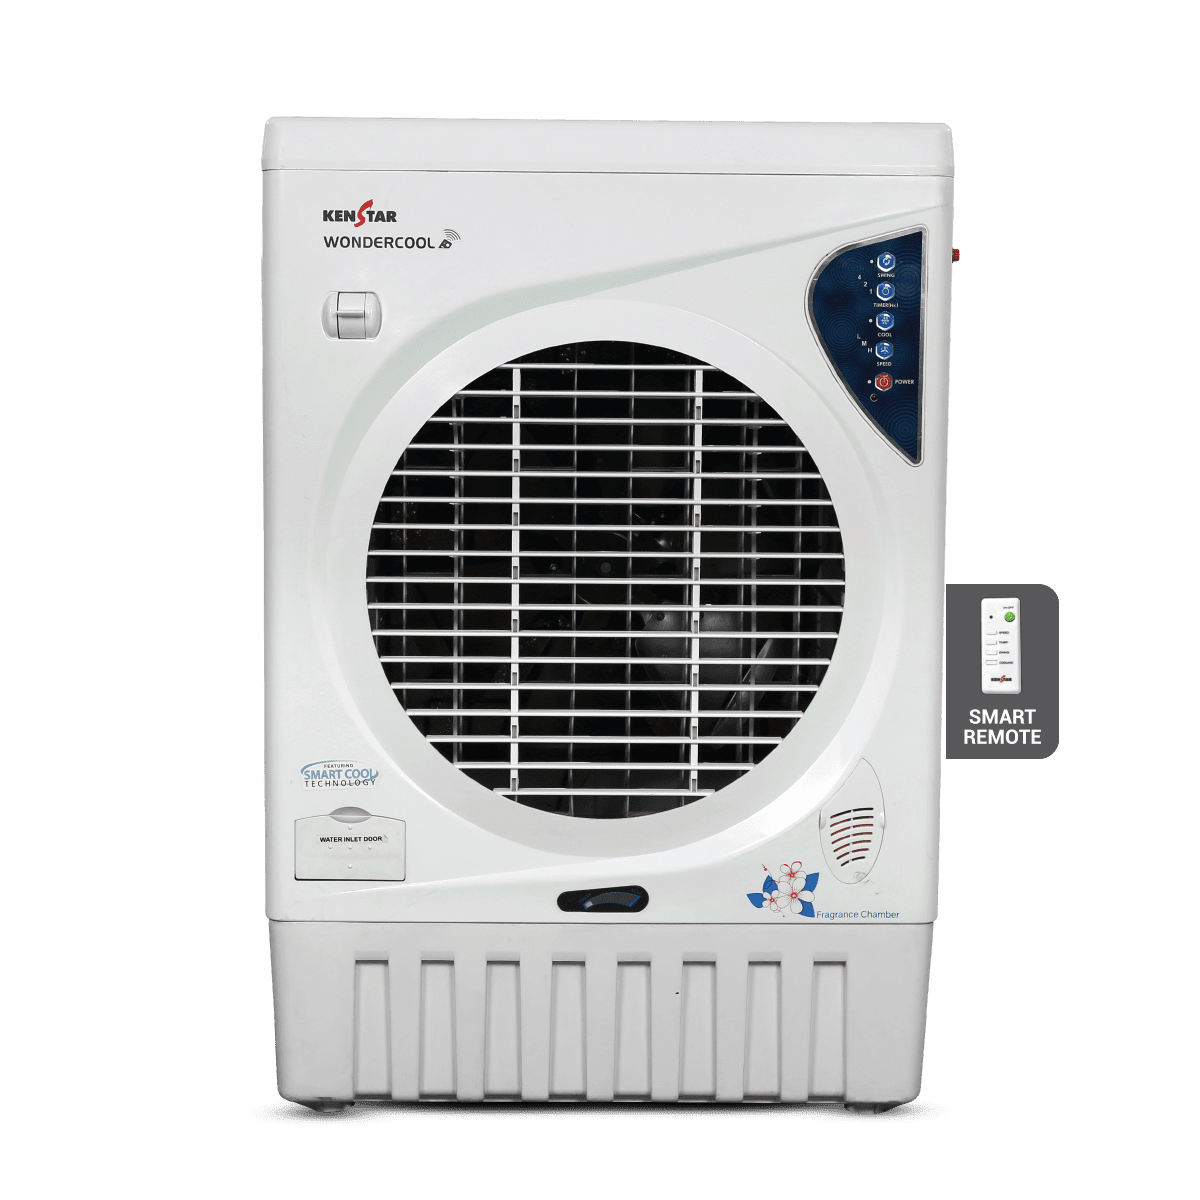 Kenstar Wondercool 40L Air Cooler with Remote On Dillimall.Com